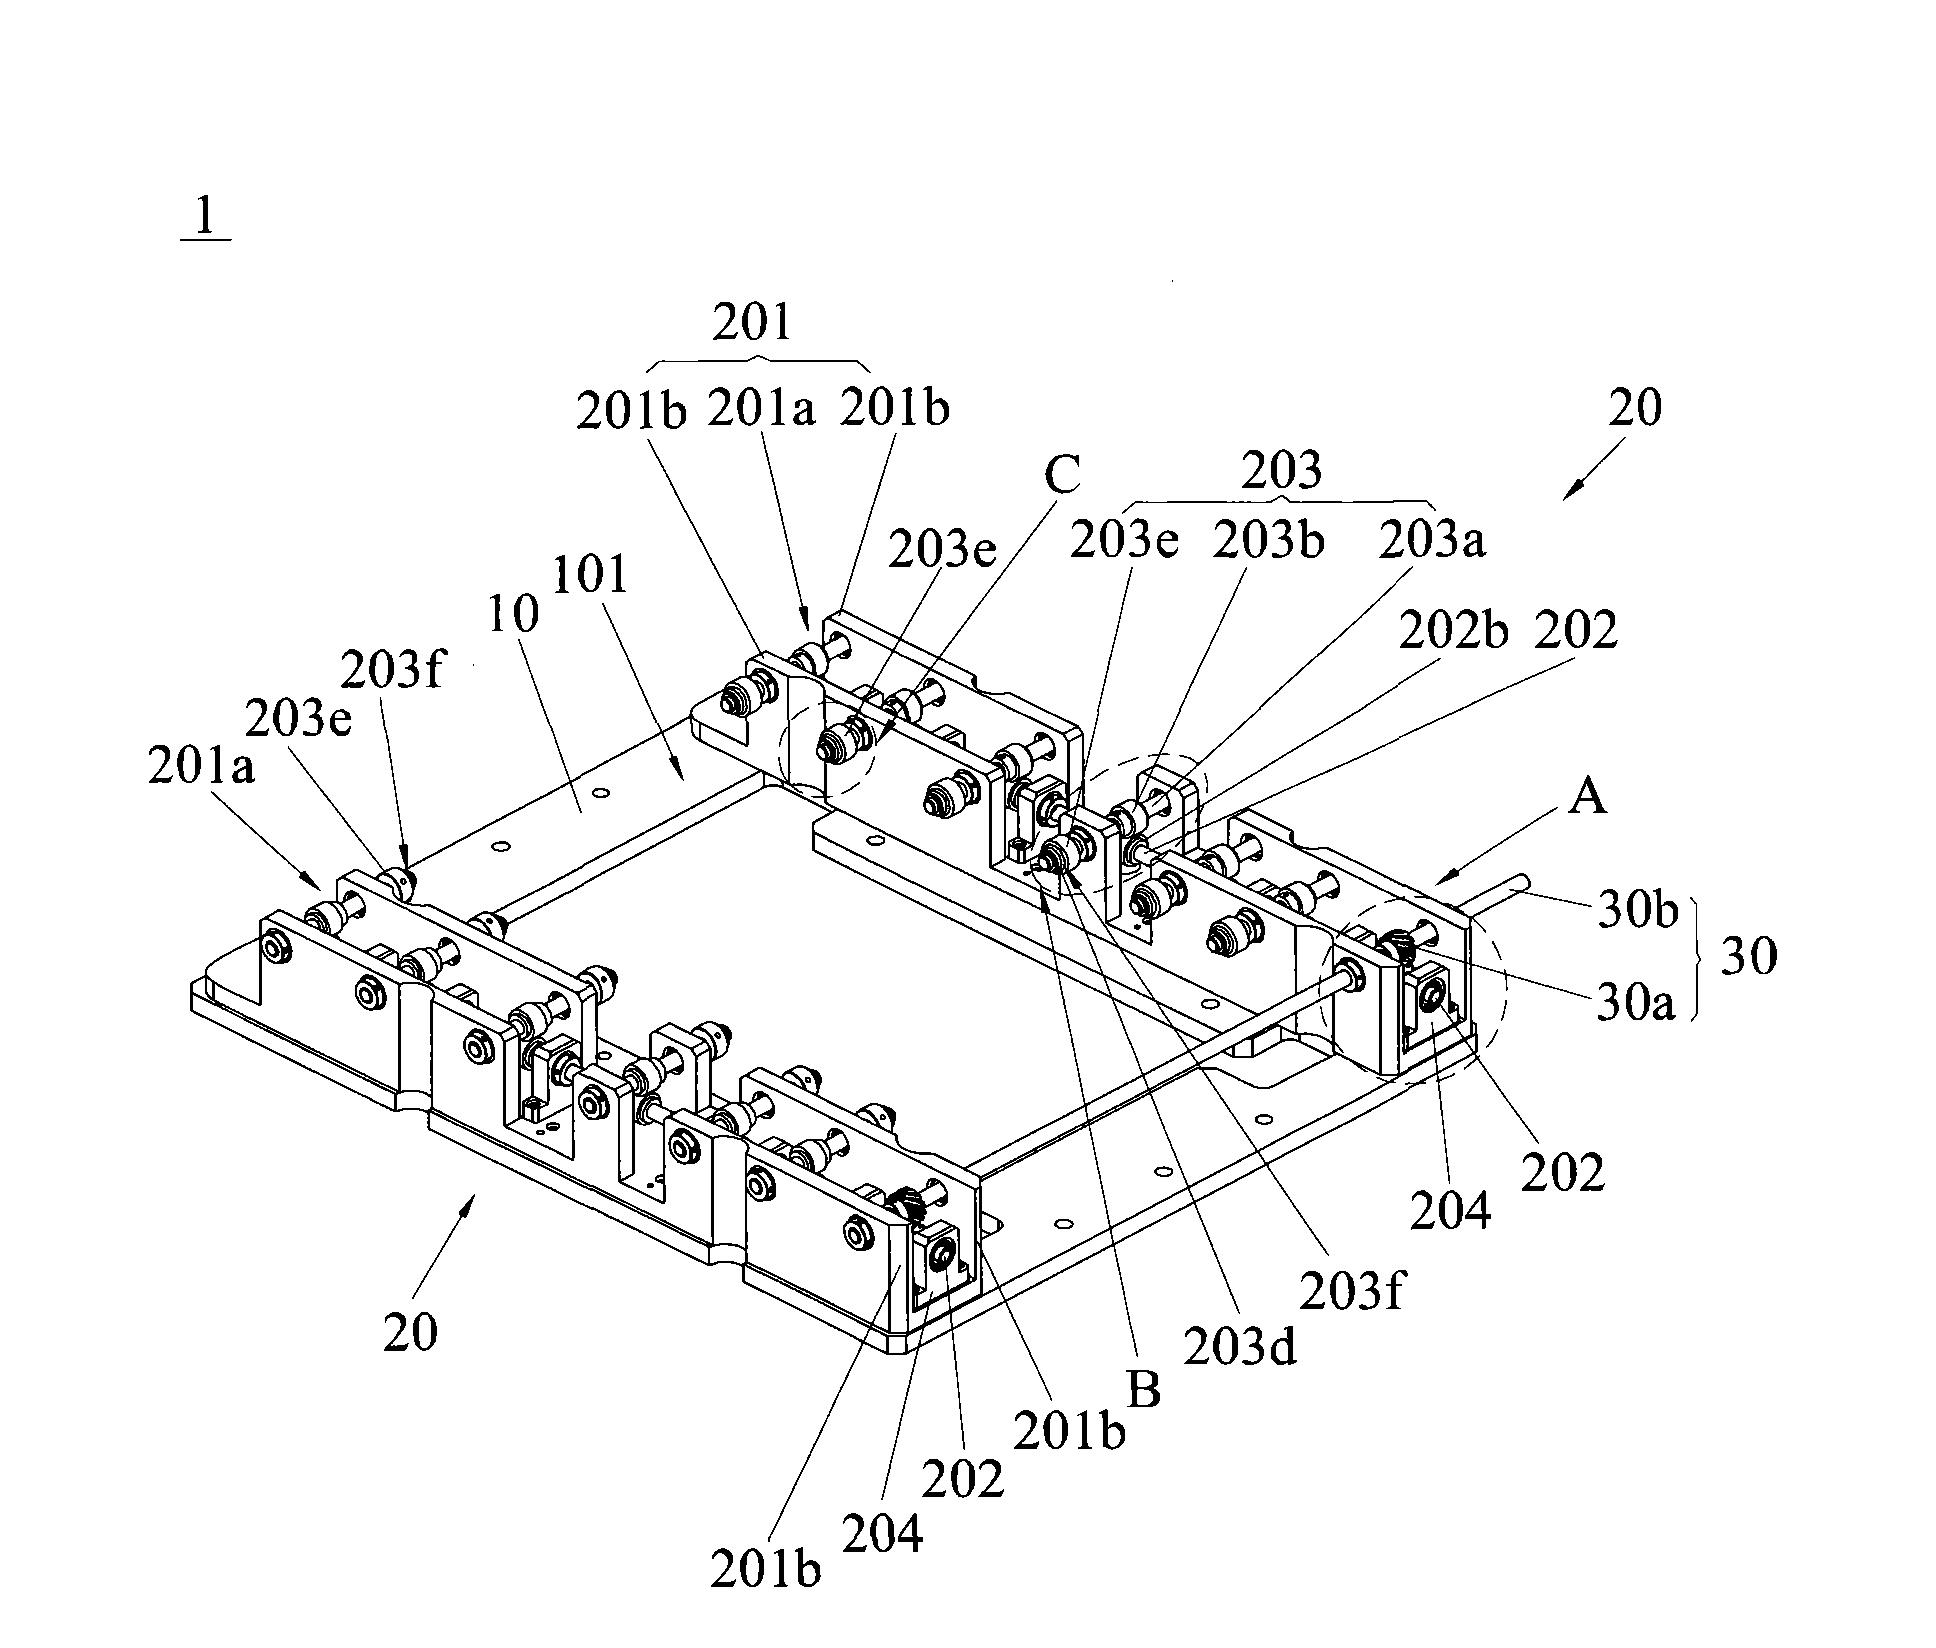 Substrate transmission mechanism